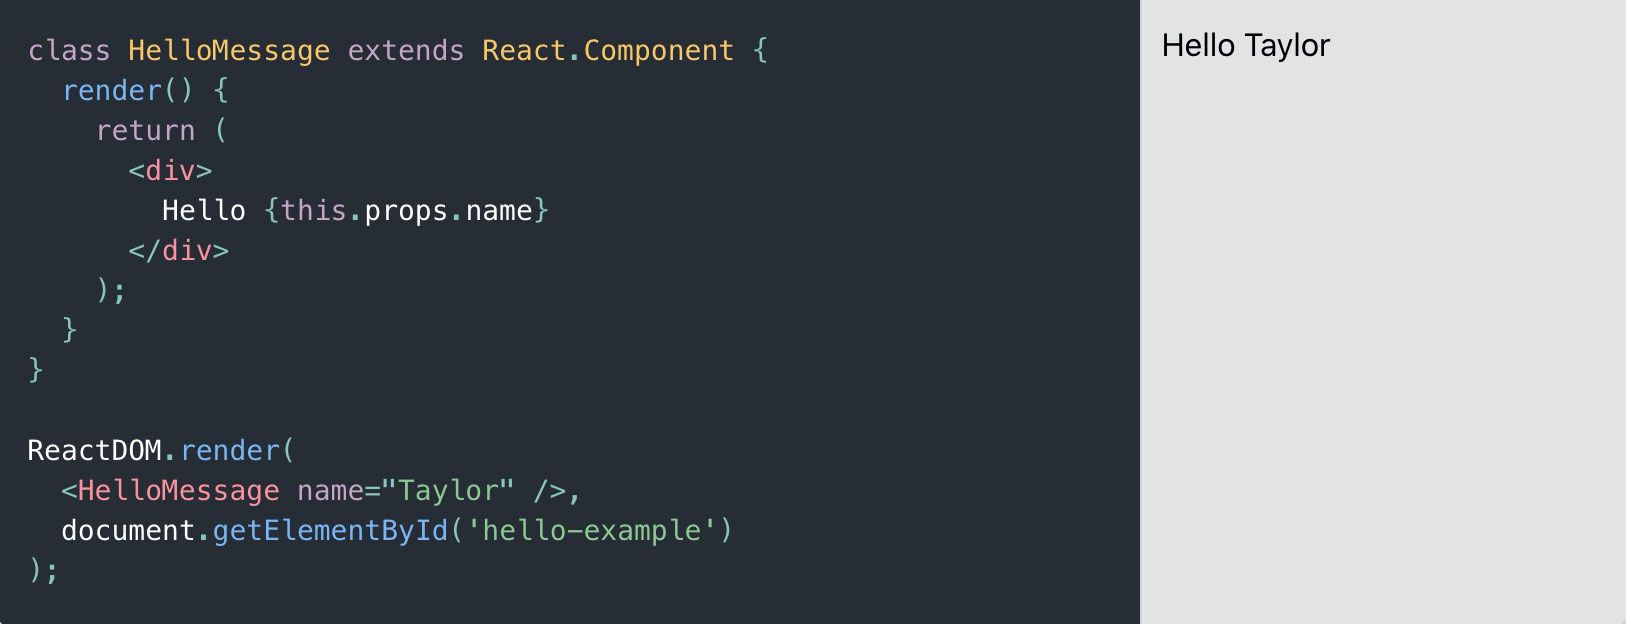 "A Simple Component" example from https://reactjs.org/